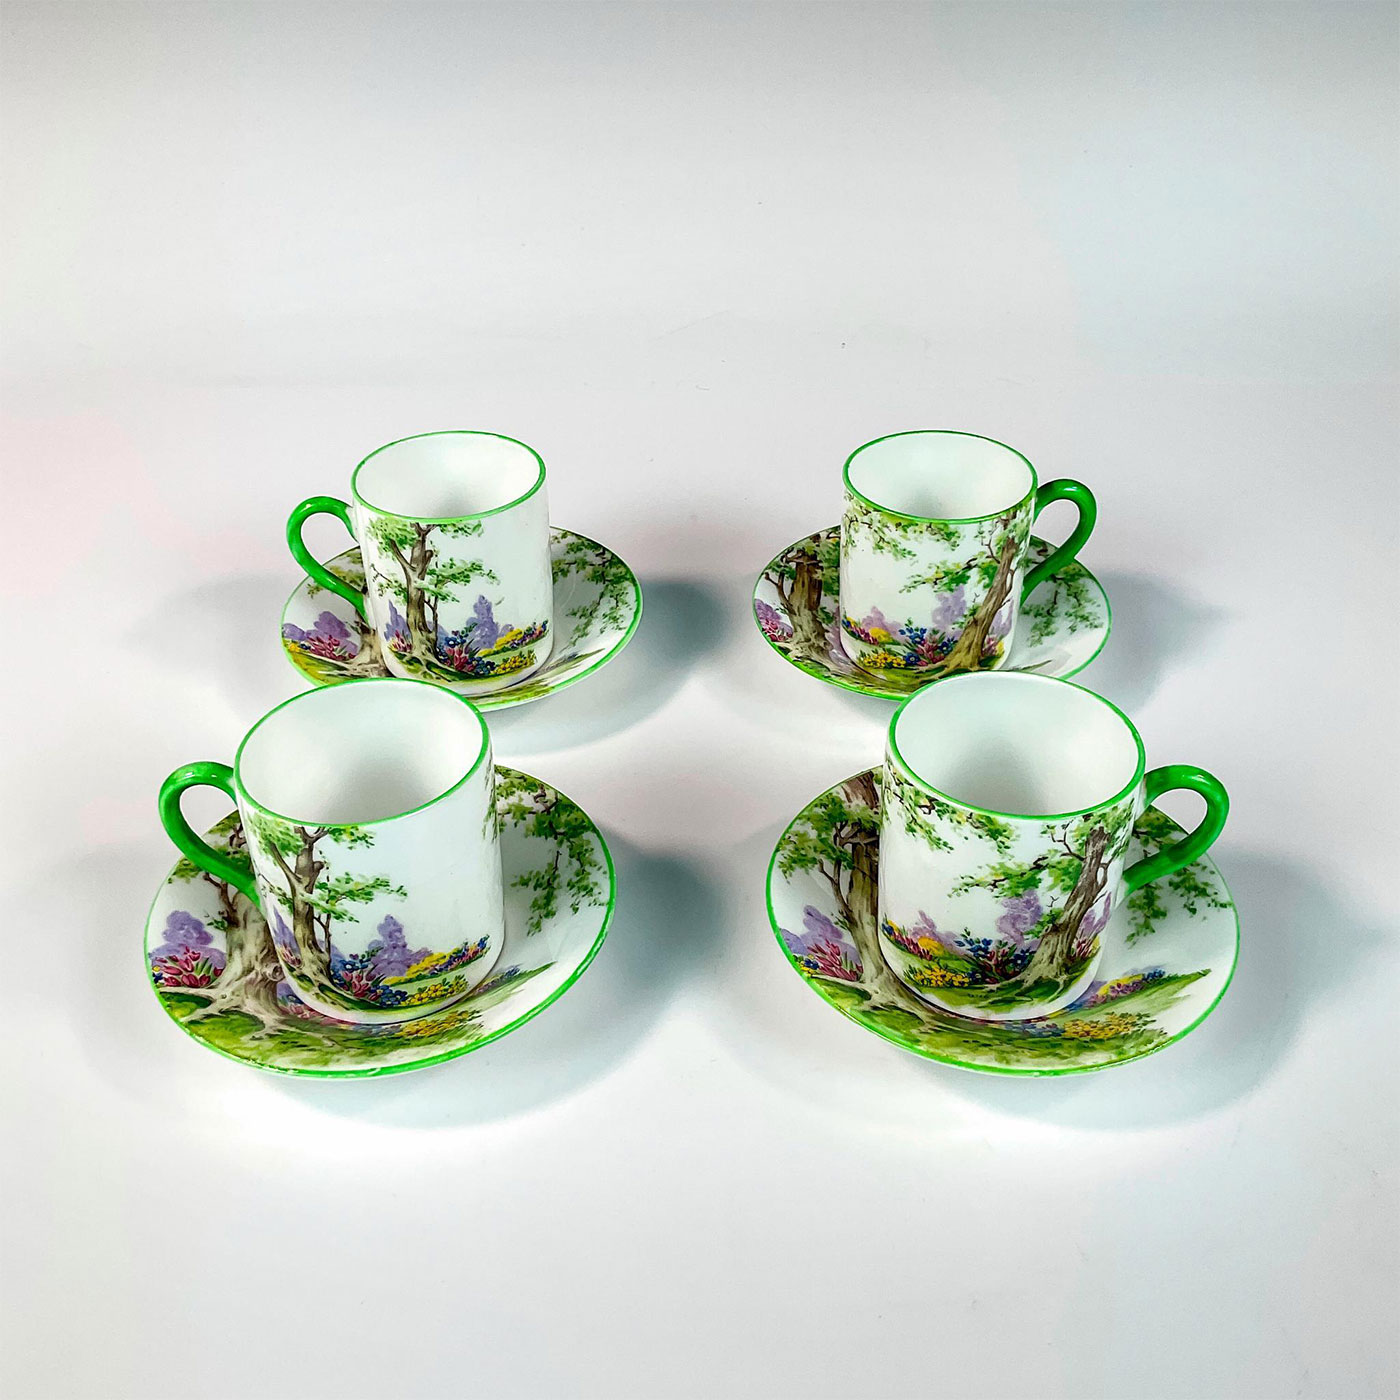 8pc Royal Albert Bone China Espresso Cups and Saucers - Image 2 of 5